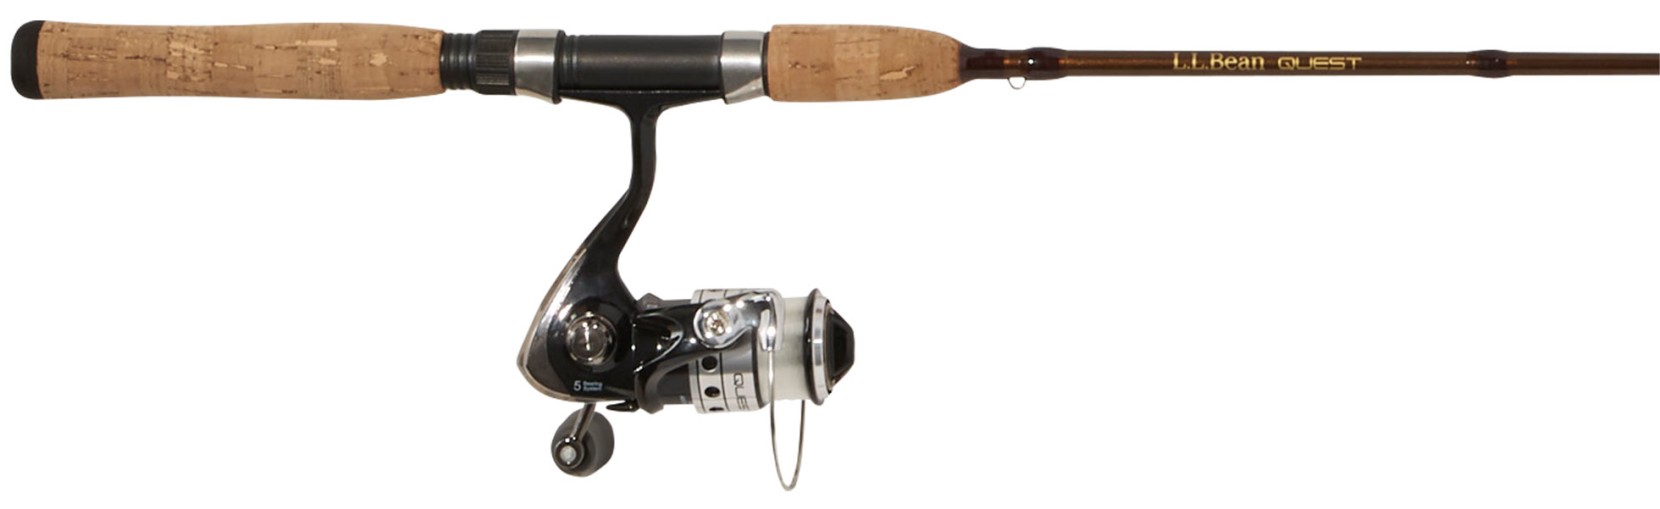 A rod and reel spin casting combo.